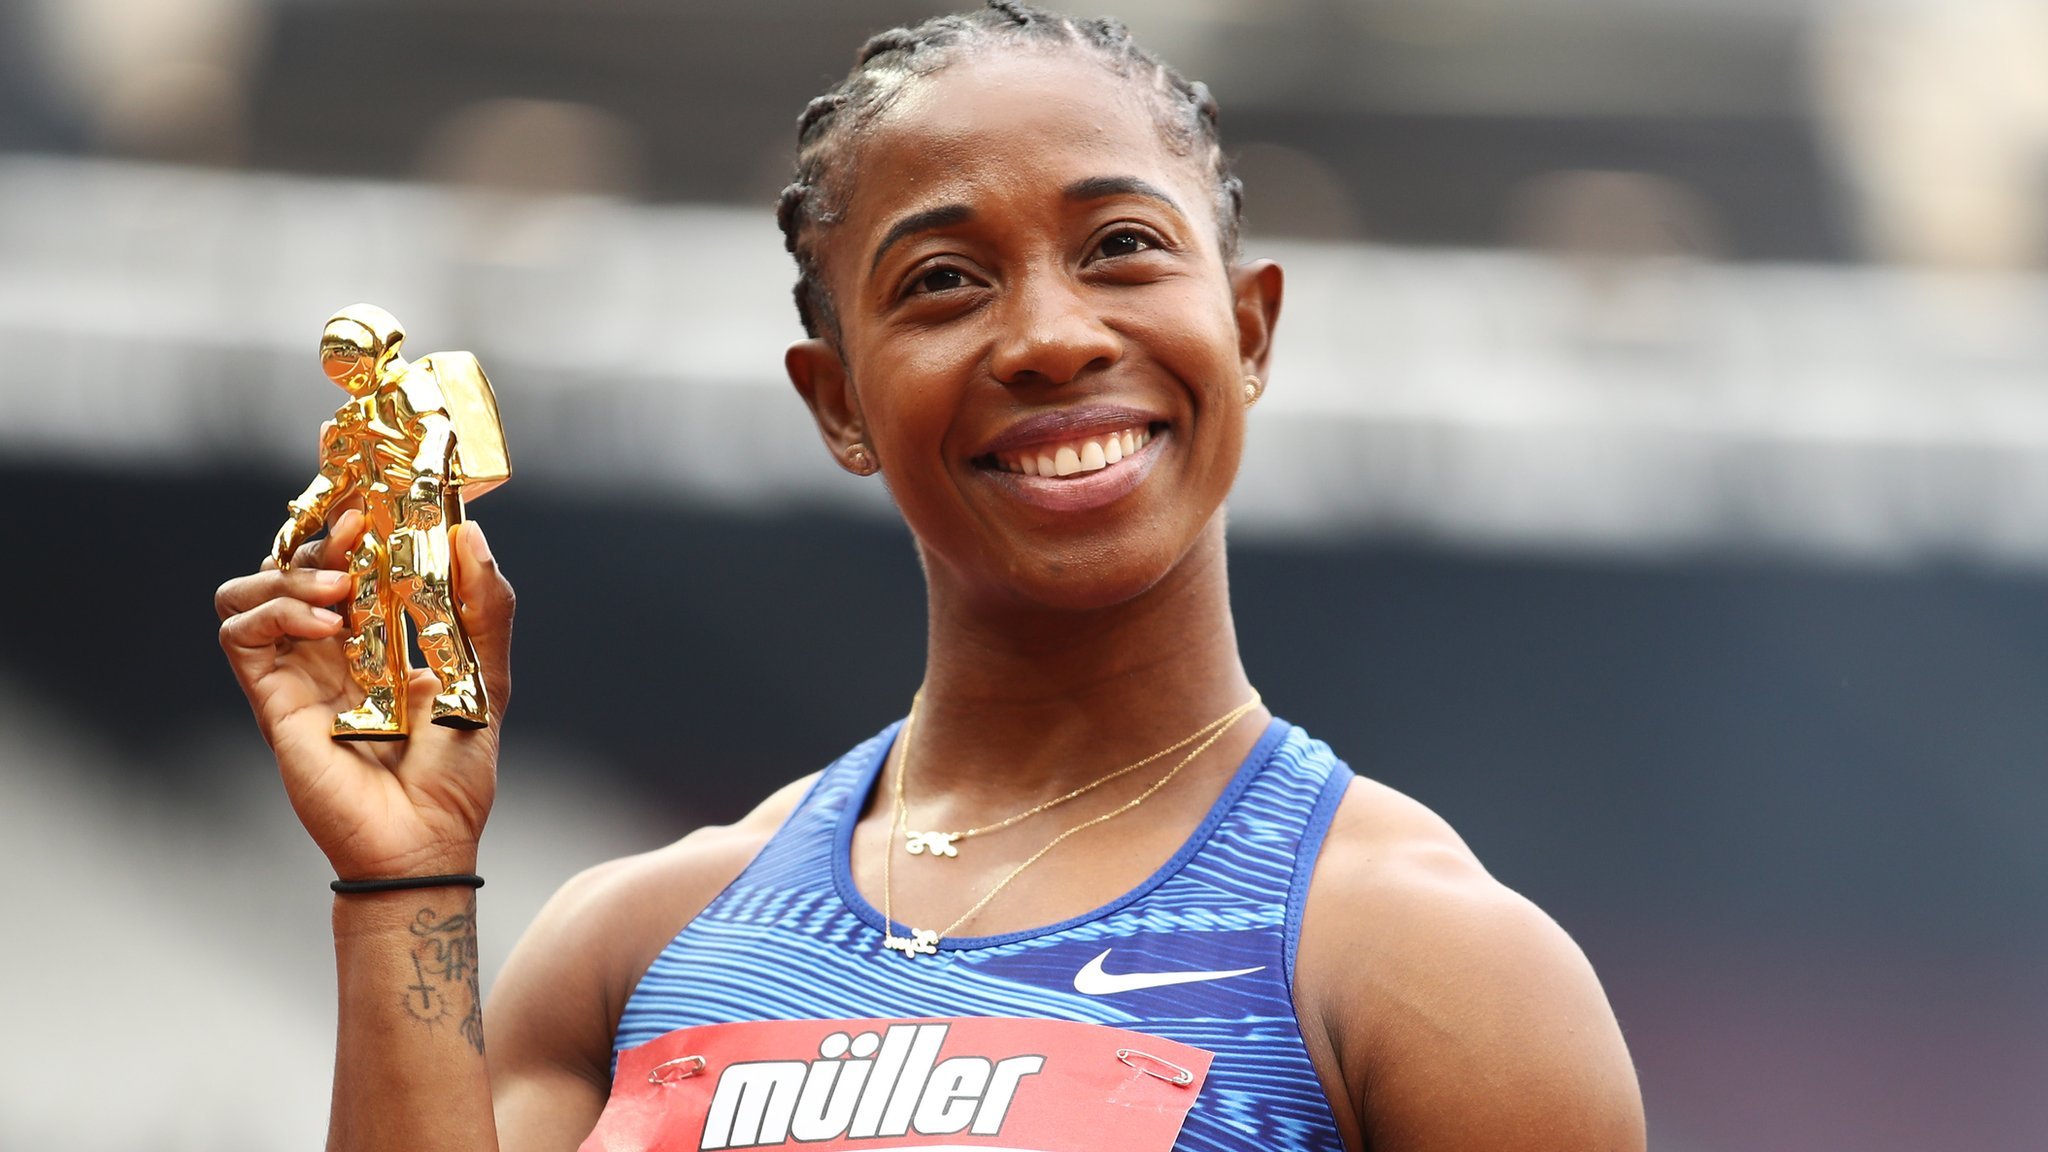 Shelly-Ann Fraser-Pryce, Biography, Titles, Medals, & Facts